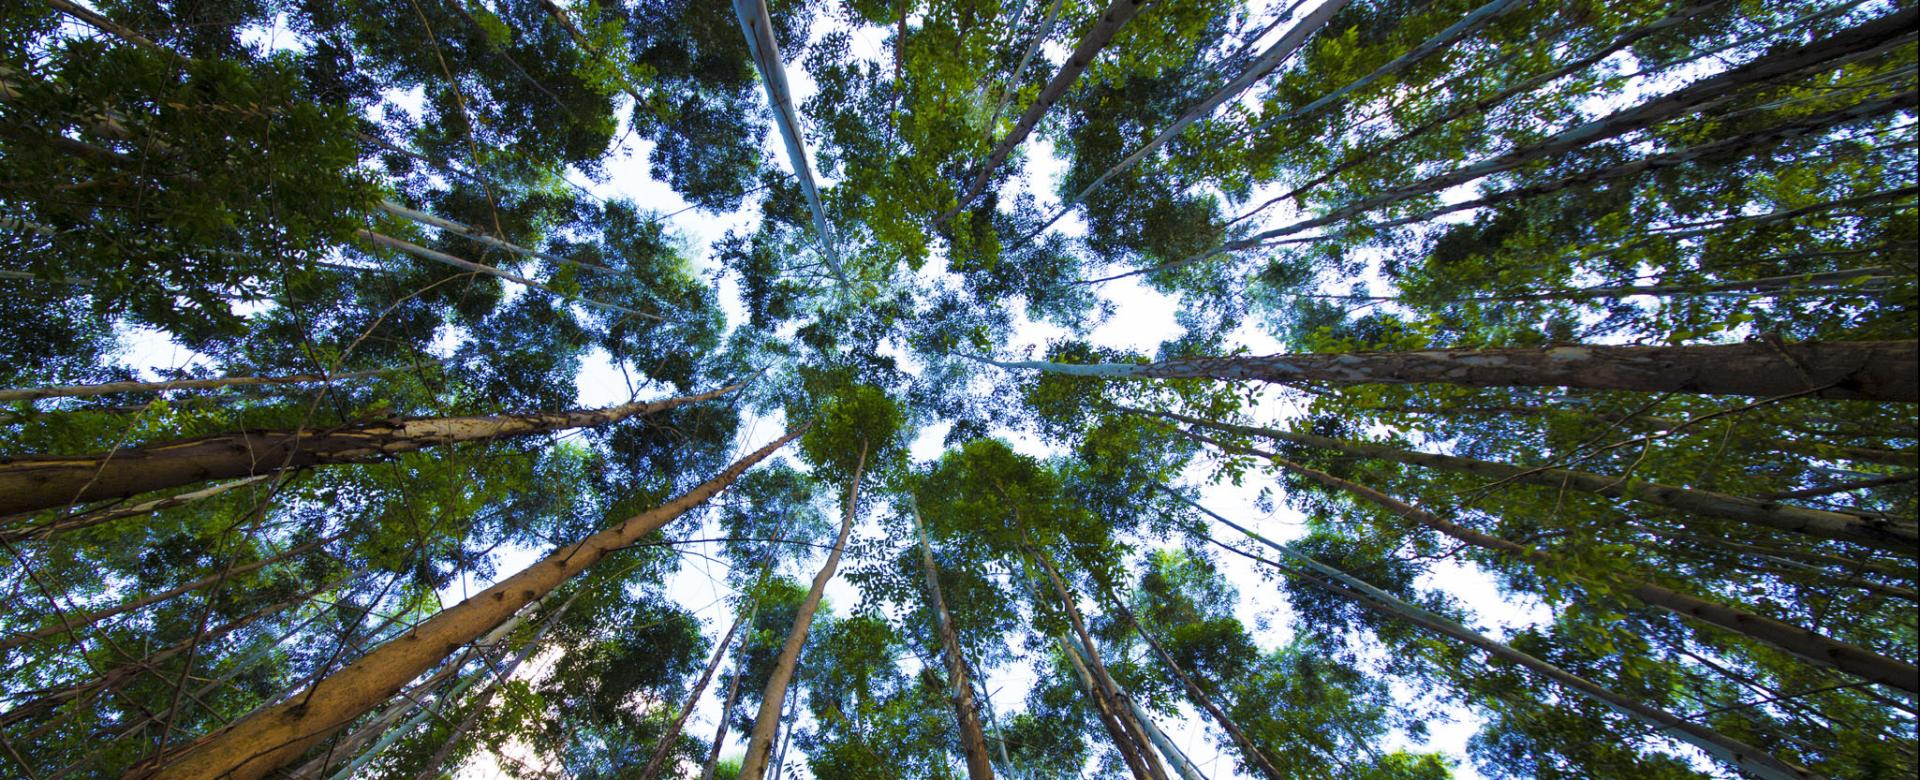 Looking up to trees in forest